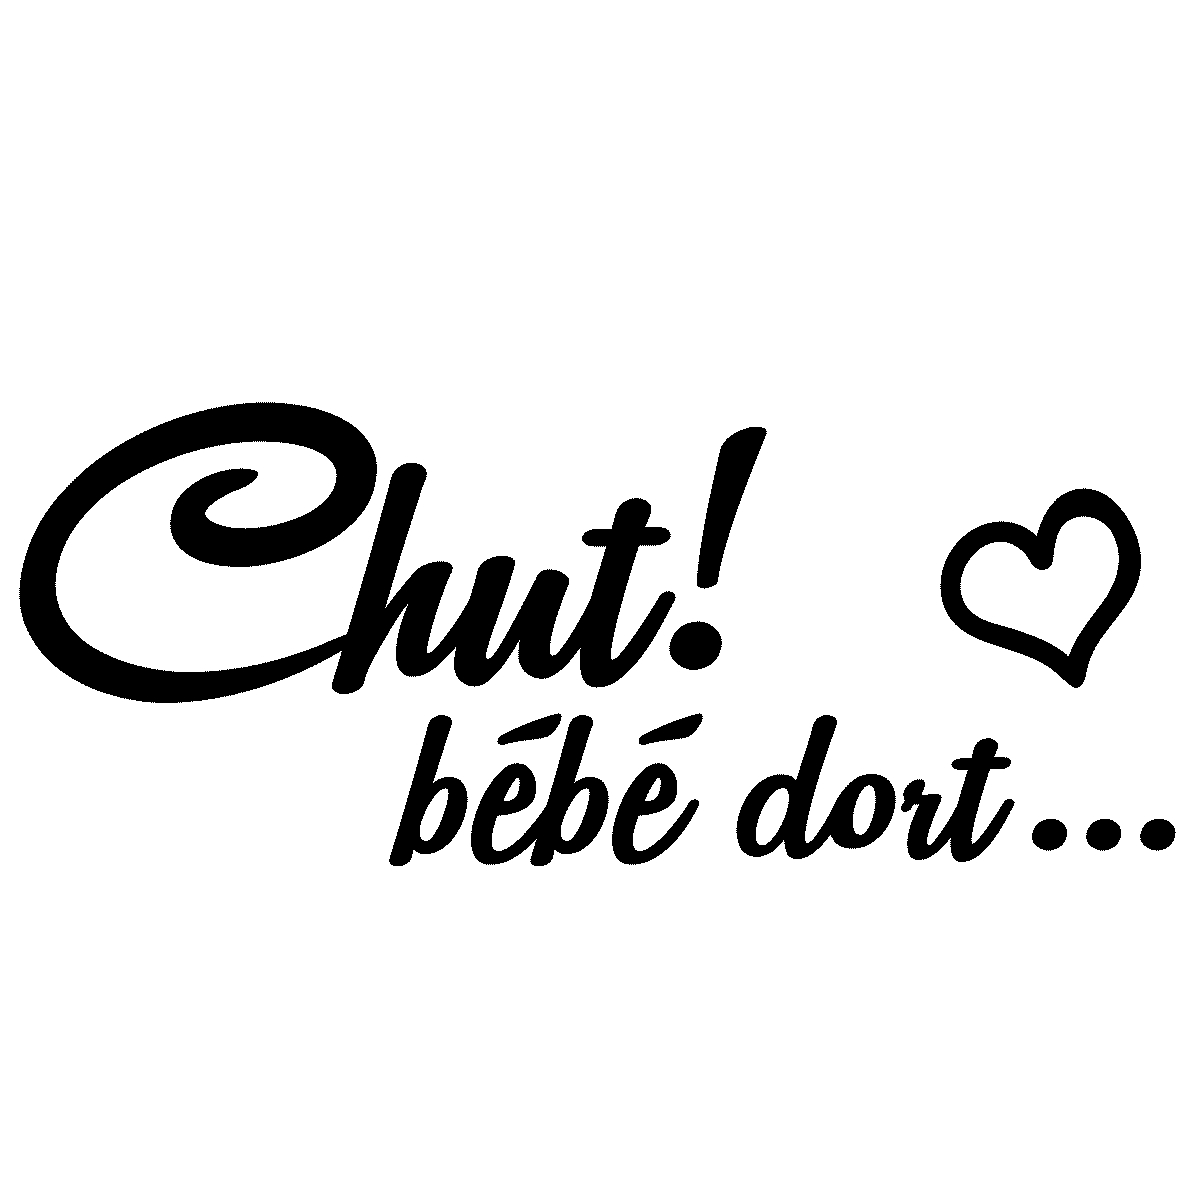 Wall Decal Chut Bebe Dort Wall Decal Quote Wall Stickers Room Ambiance Sticker